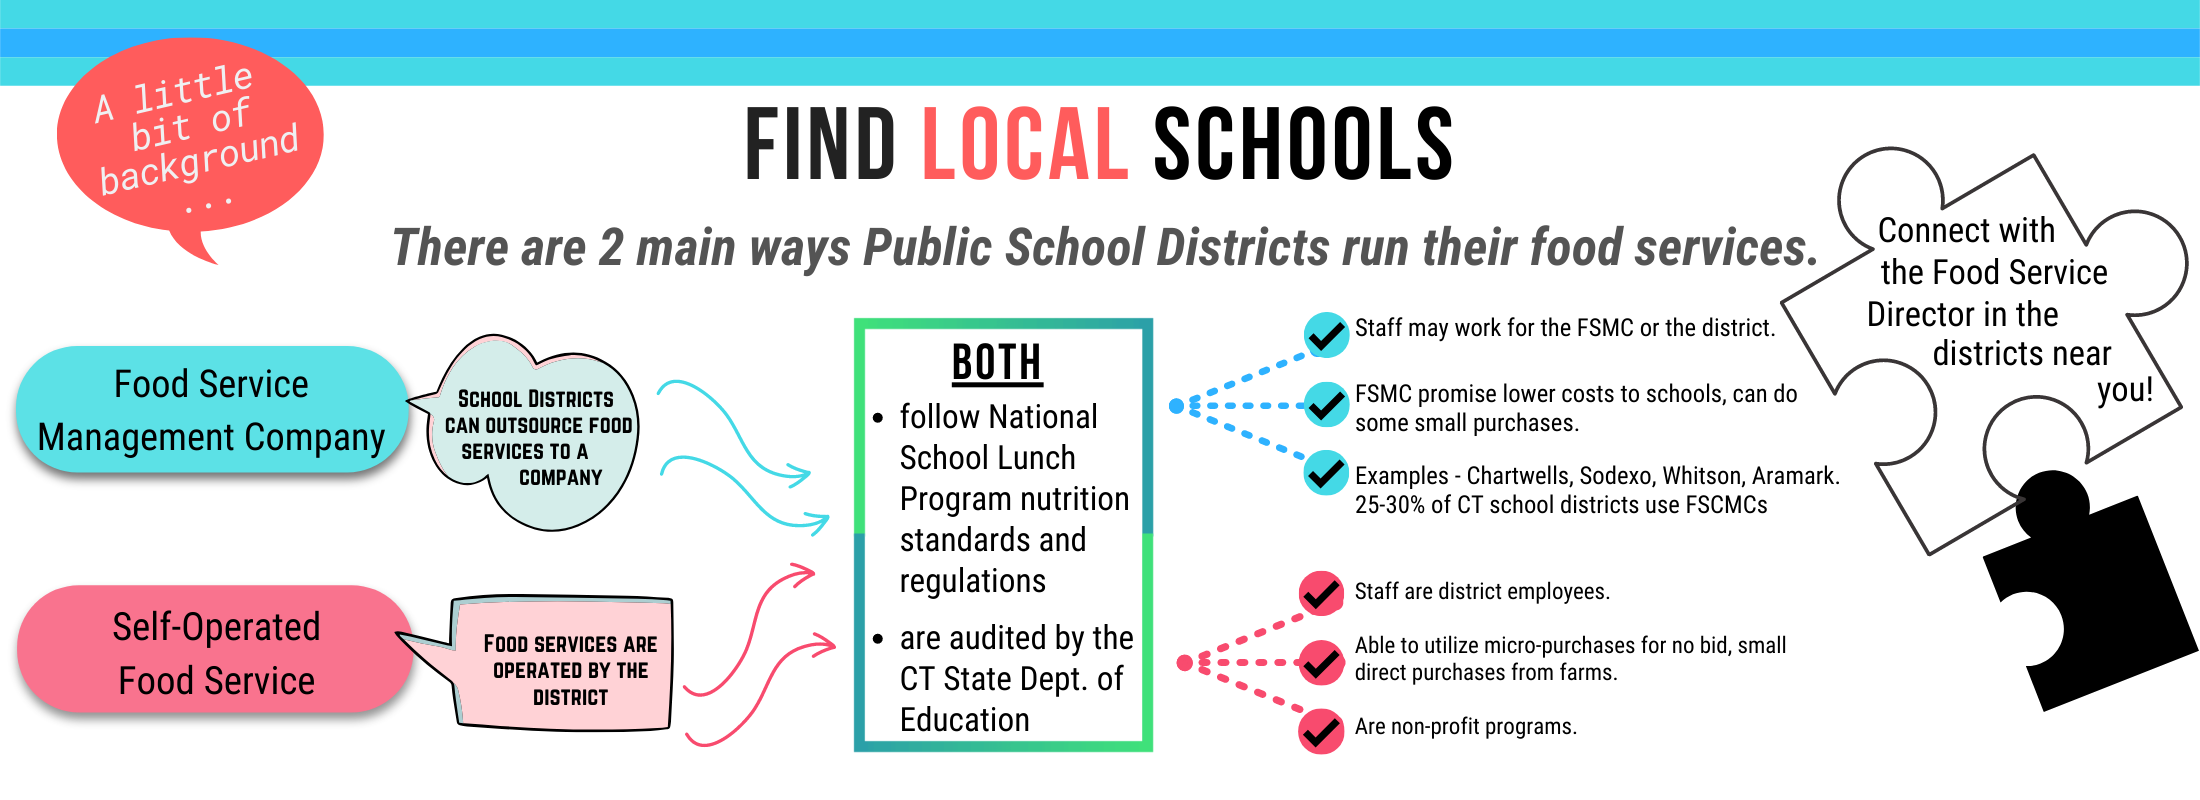 Find Local Schools Infographic